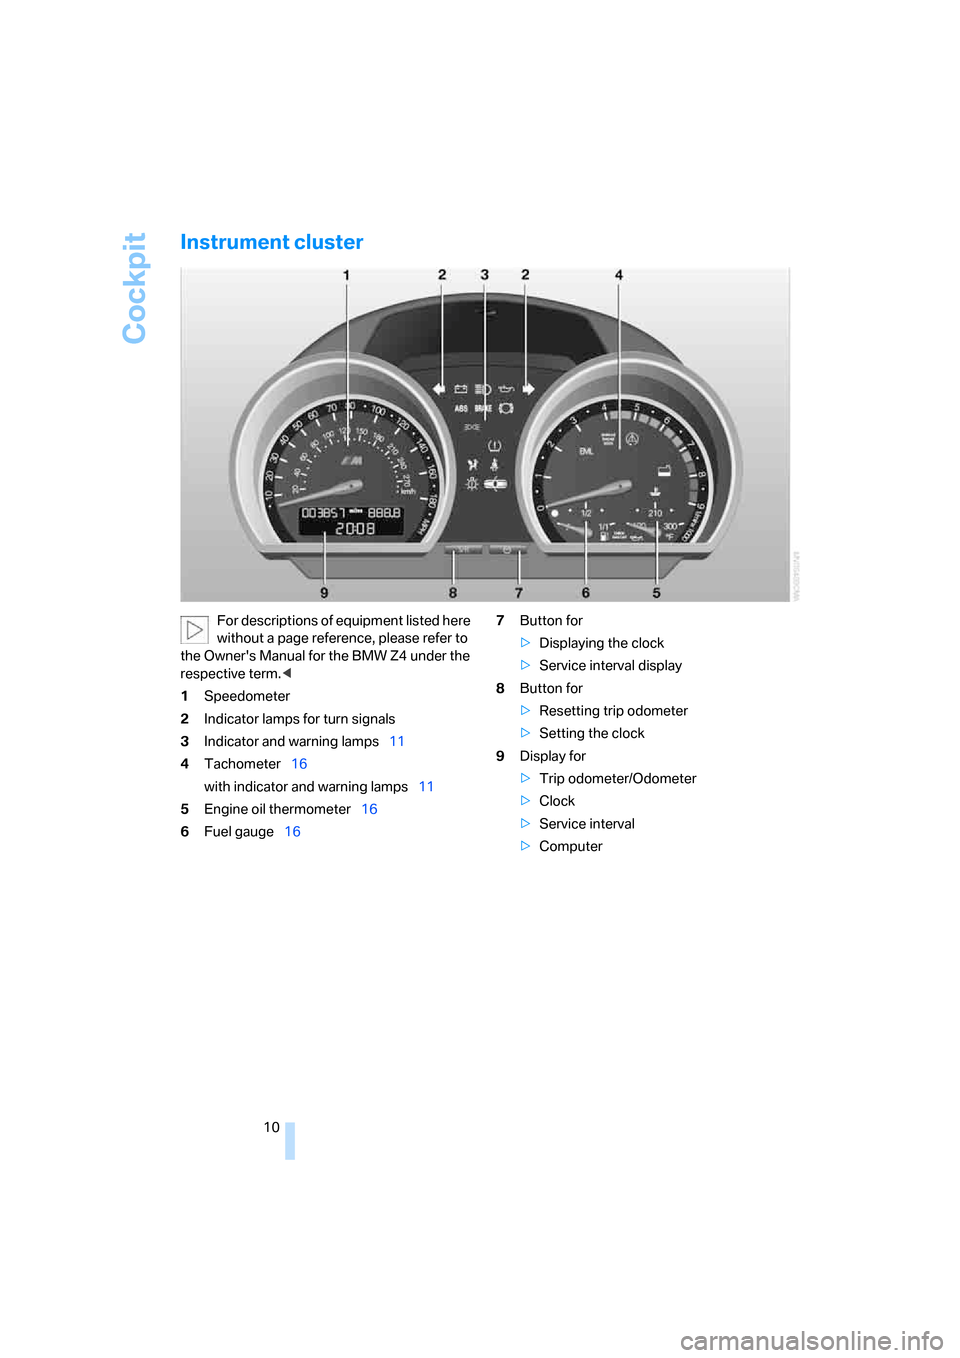 BMW Z4M COUPE 2006 E86 Owners Manual Cockpit
10
Instrument cluster
For descriptions of equipment listed here 
without a page reference, please refer to 
the Owners Manual for the BMW Z4 under the 
respective term.<
1Speedometer
2Indicat